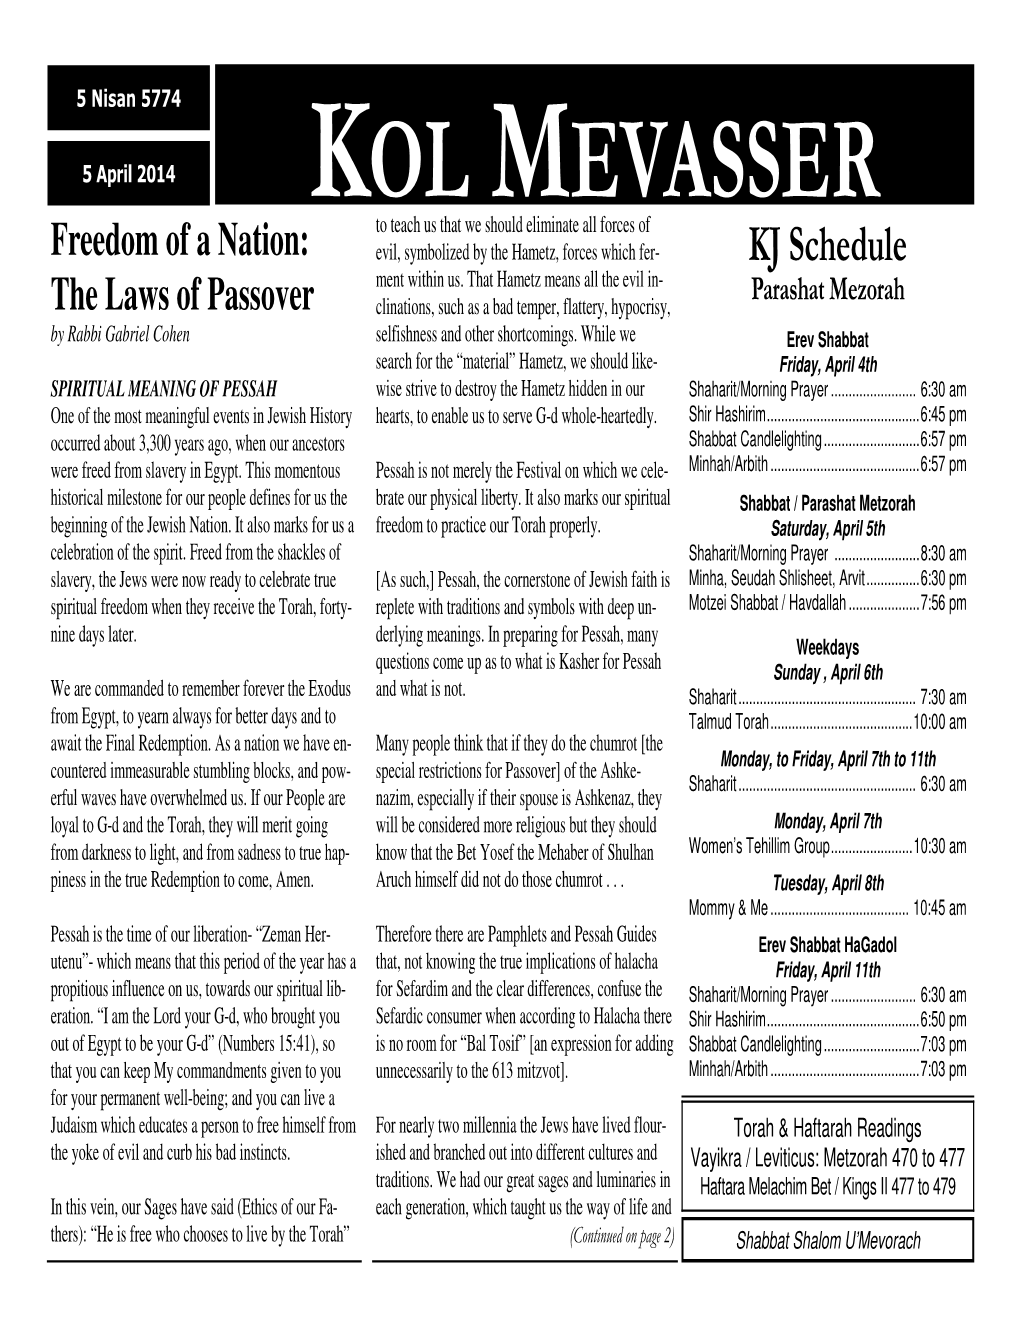 KOL MEVASSER Freedom of a Nation: to Teach Us That We Should Eliminate All Forces of Evil, Symbolized by the Hametz, Forces Which Fer- KJ Schedule Ment Within Us